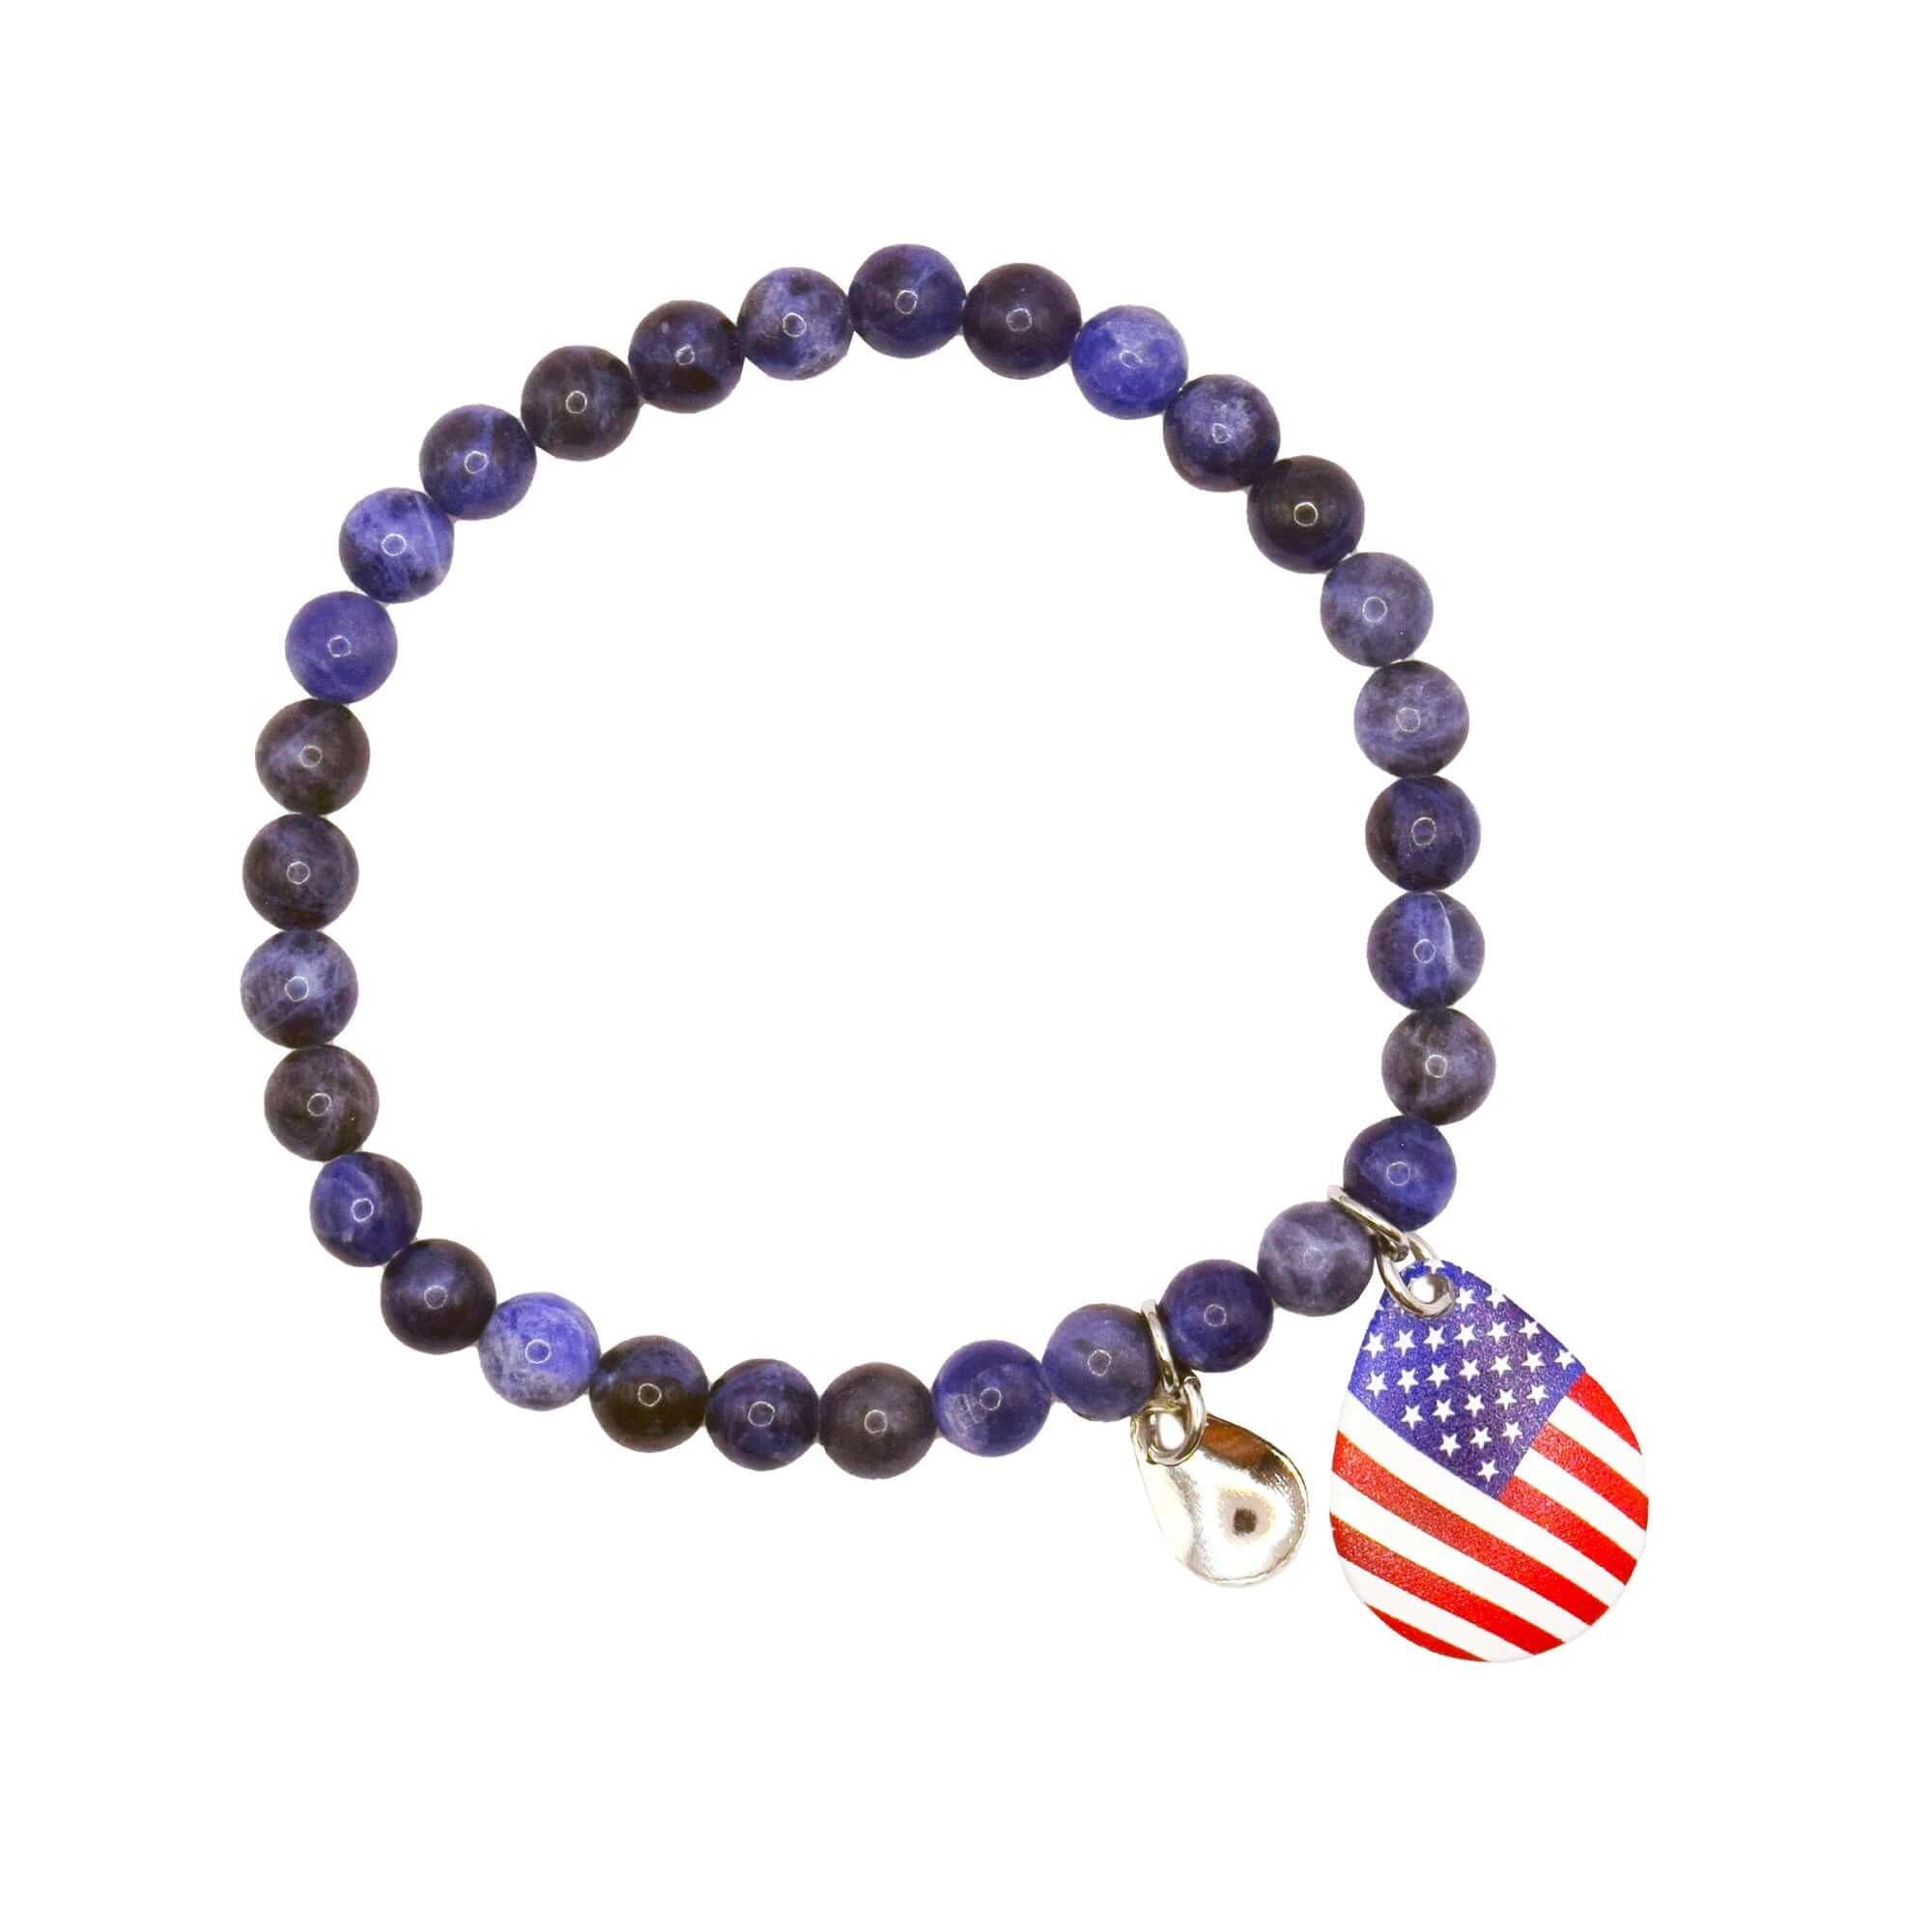 Made in USA Blue Stone Bracelet with Flag Charm